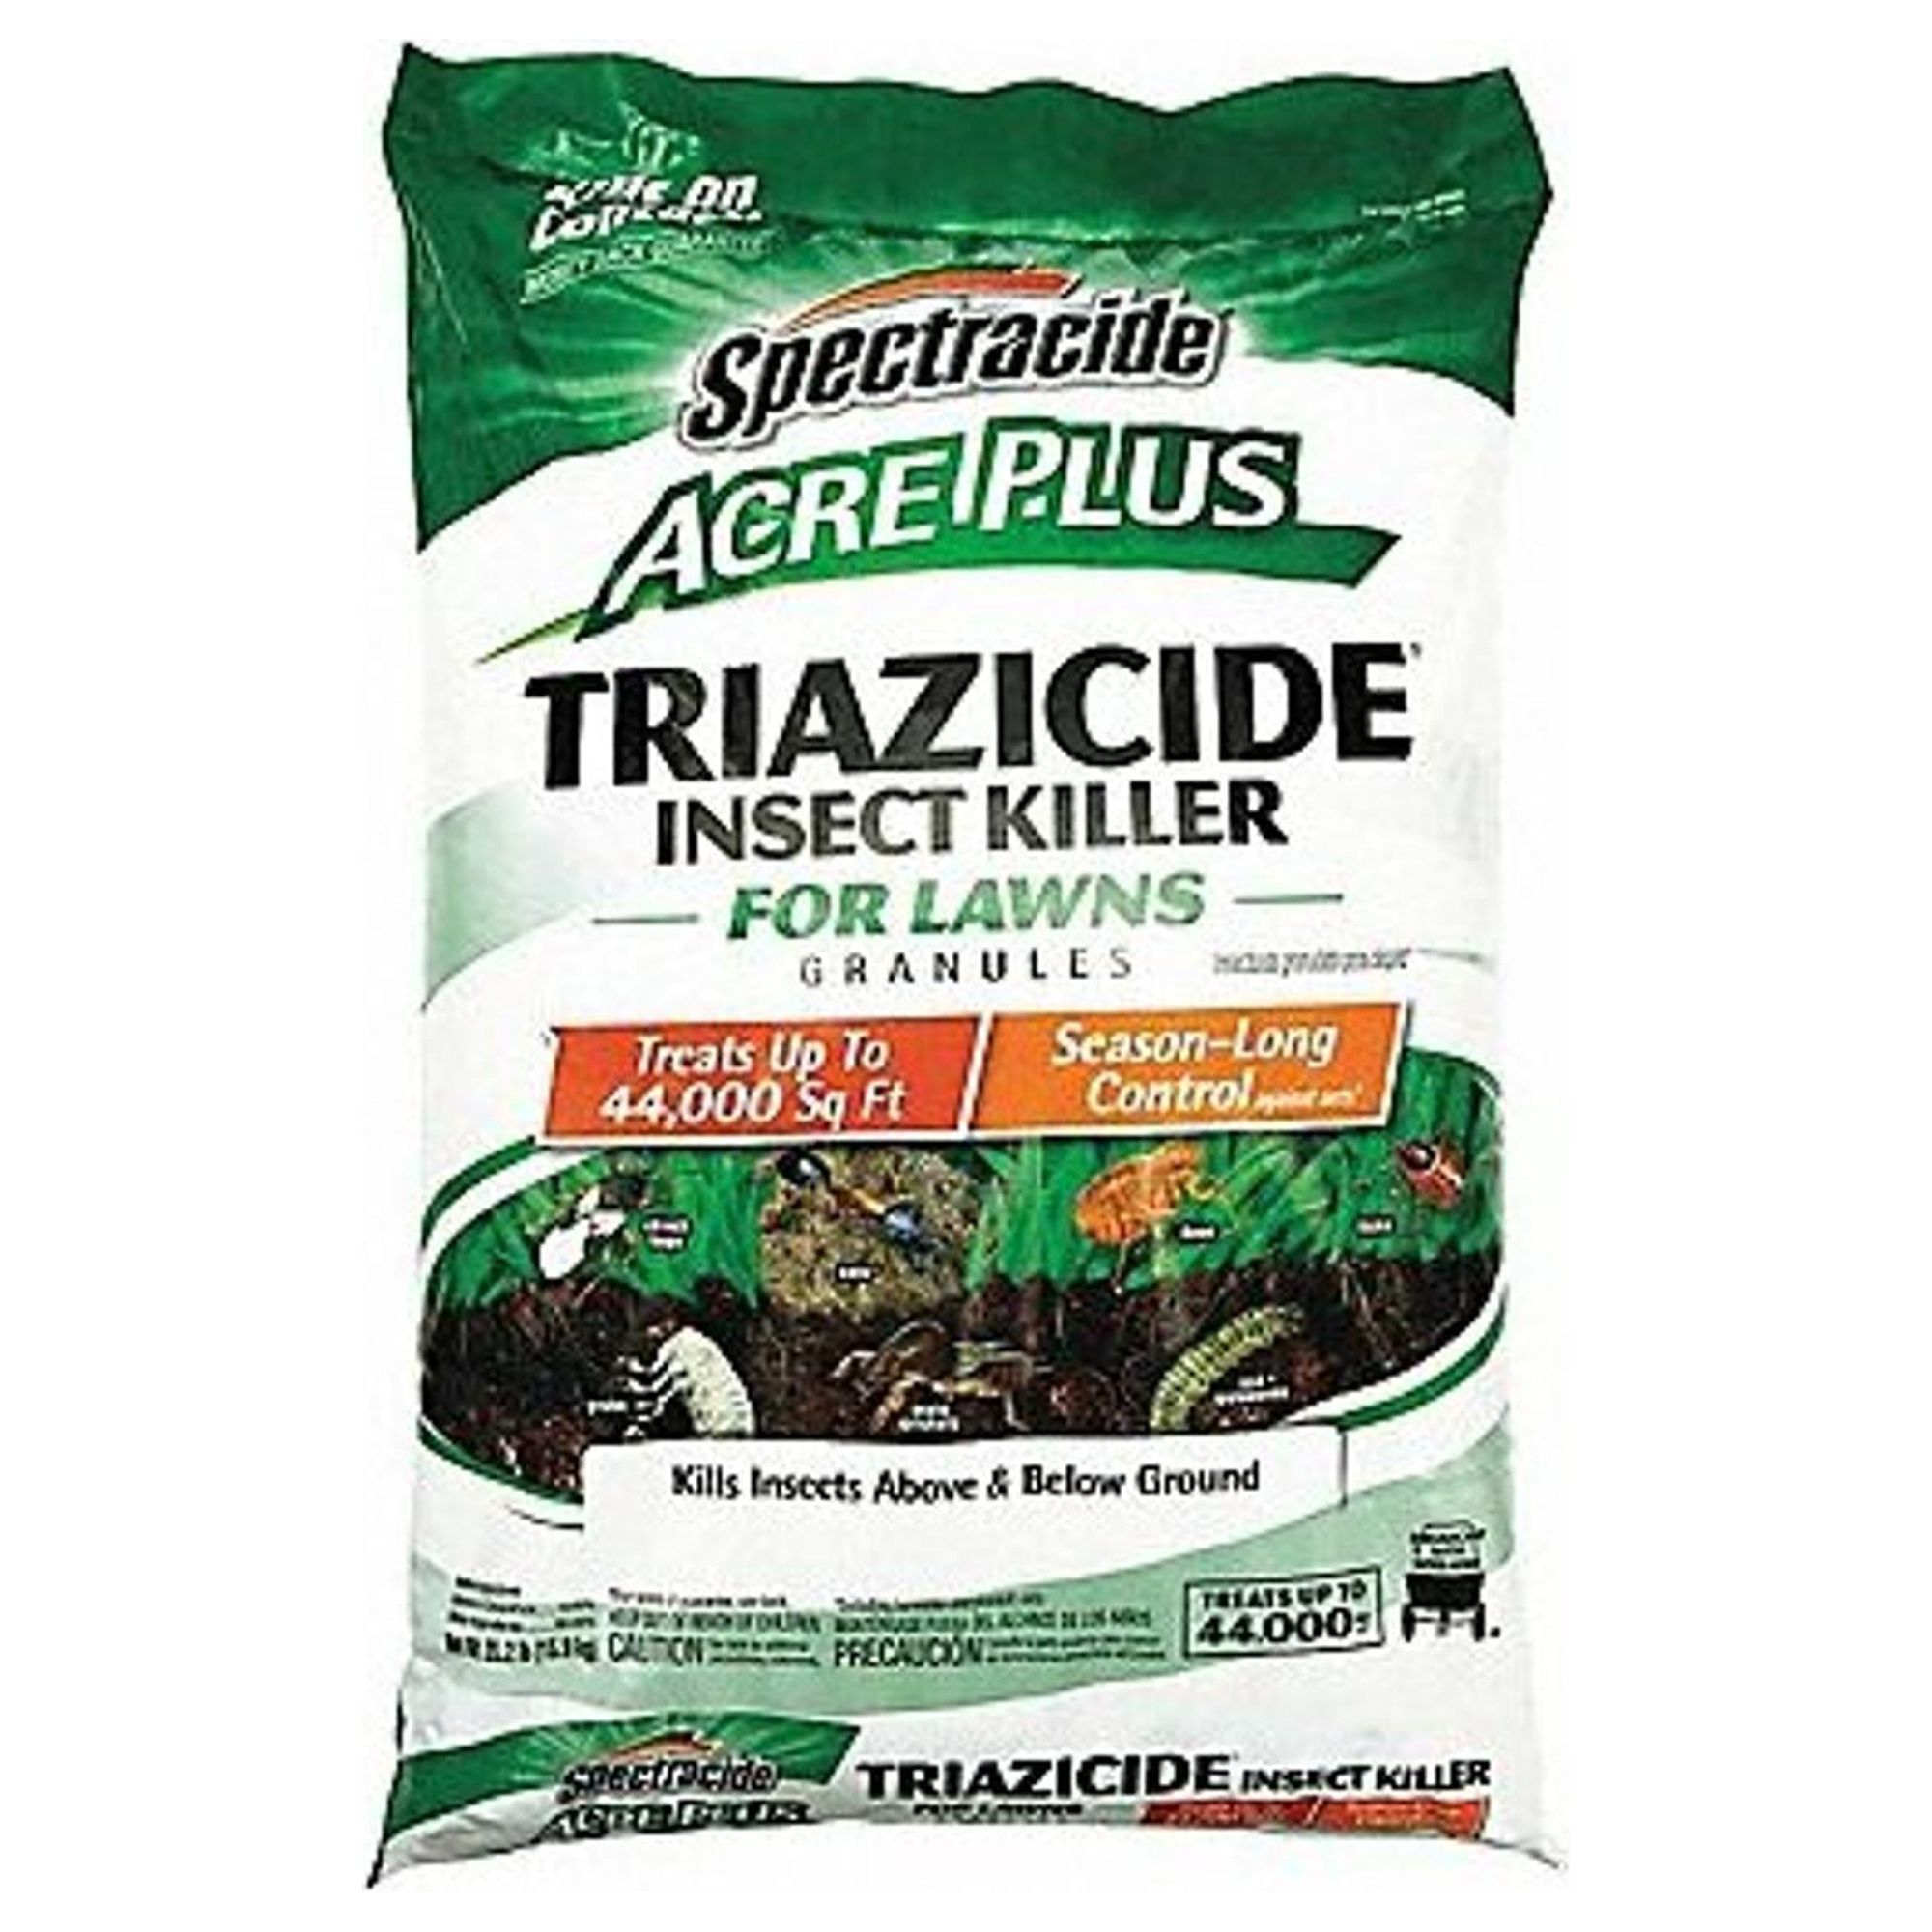 Spectracide, Pet, Home and Garden Acre Plus Triazicide Insect Killer, Granules, 35.2 Lbs. HG-96202 - image 1 of 5